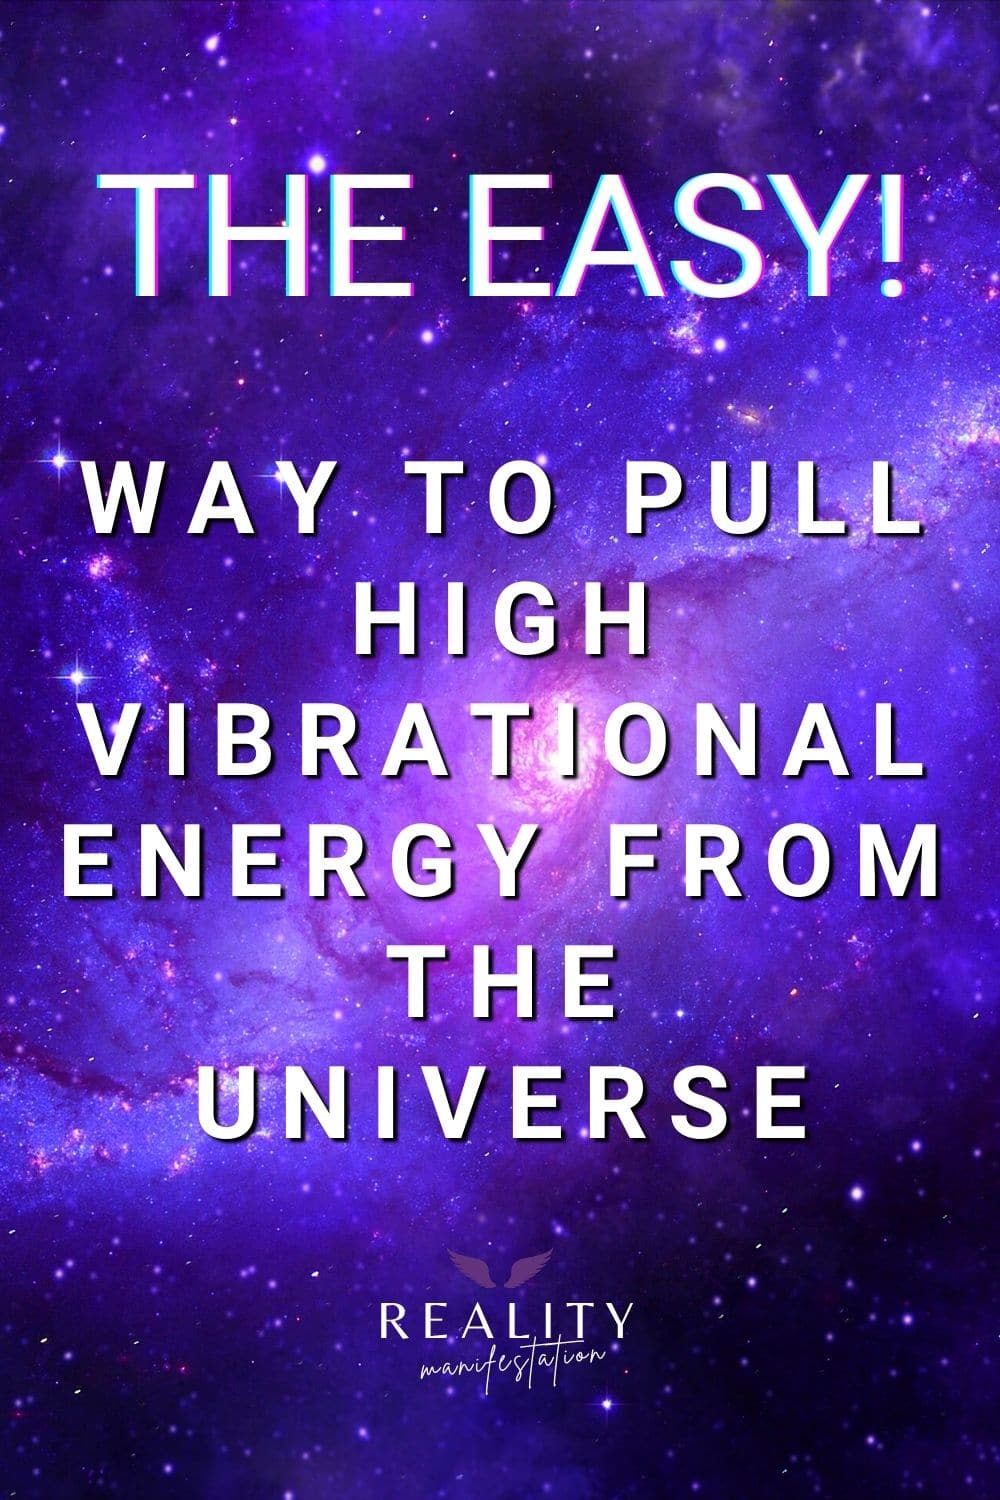 Background image of a purple galaxy with a logo at the bottom and text on top saying The Easy Way To Pull High Vibrational Energy From The Universe